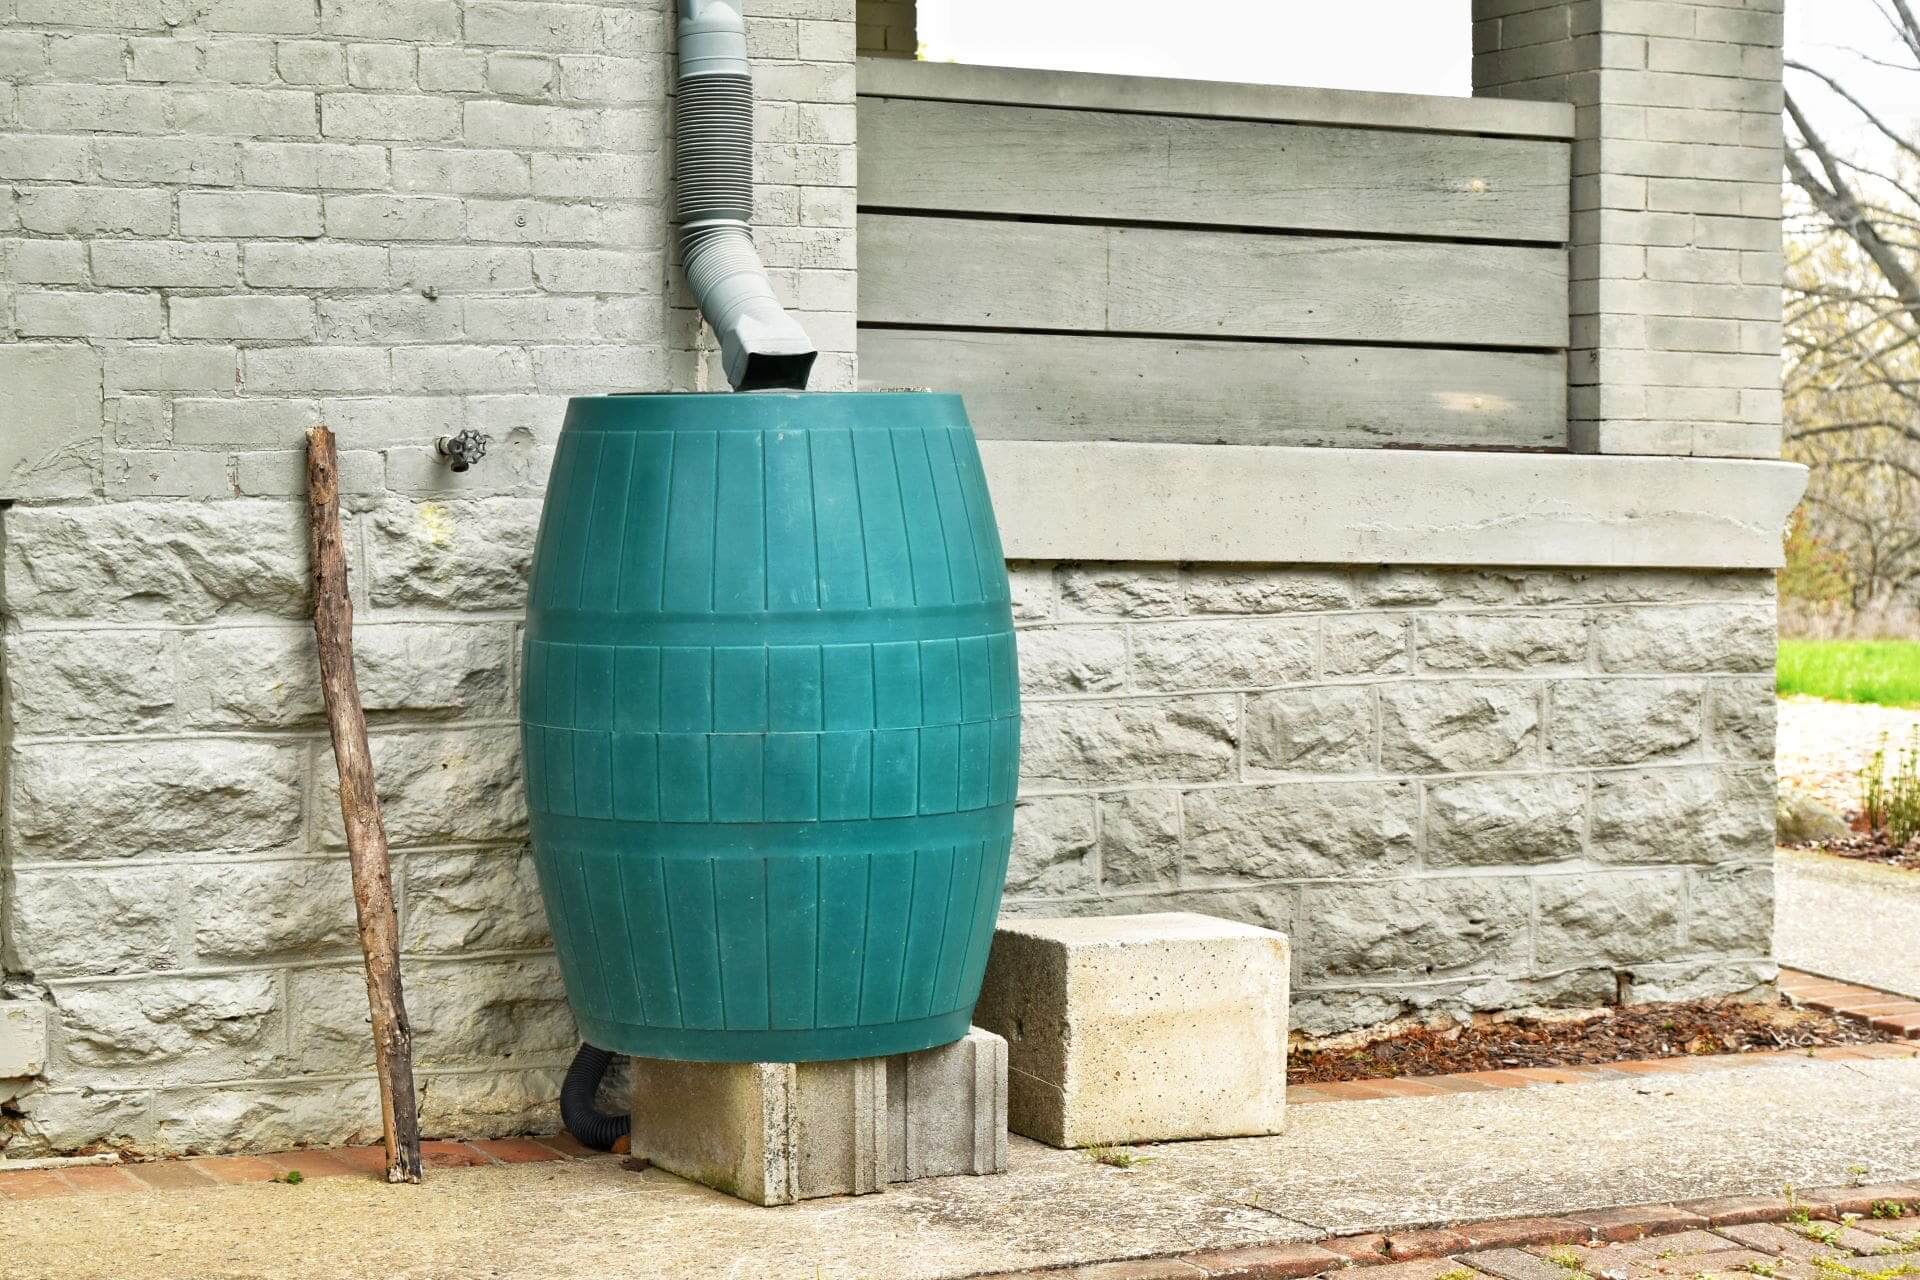 Setting up a Rainwater Collector in Your Home